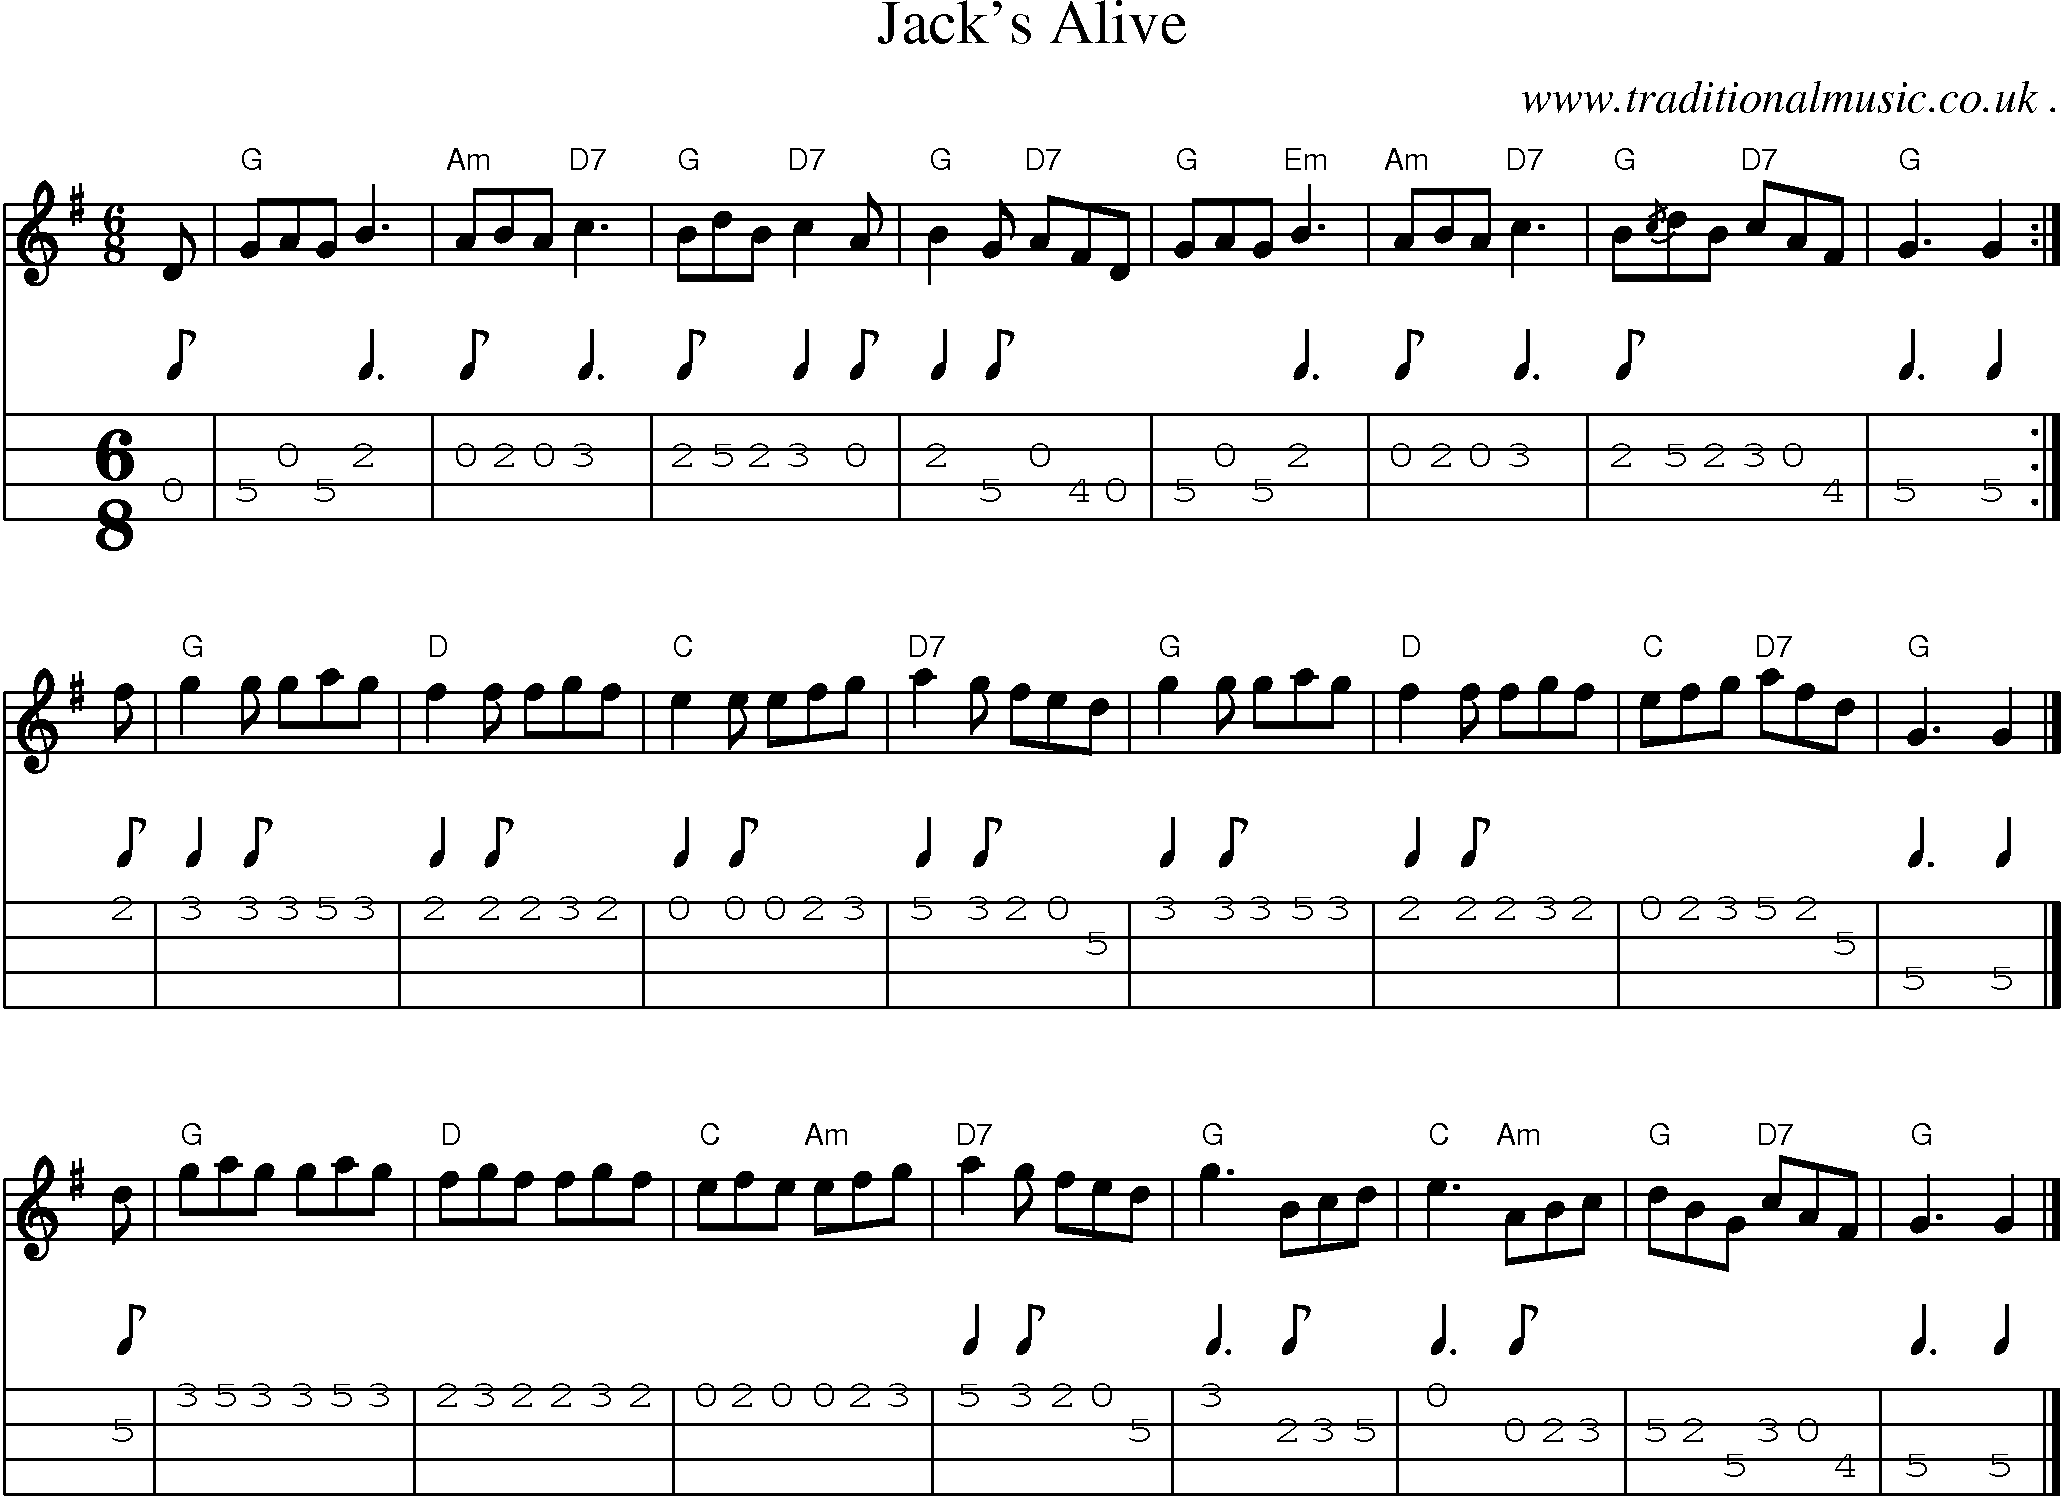 Sheet-music  score, Chords and Mandolin Tabs for Jacks Alive